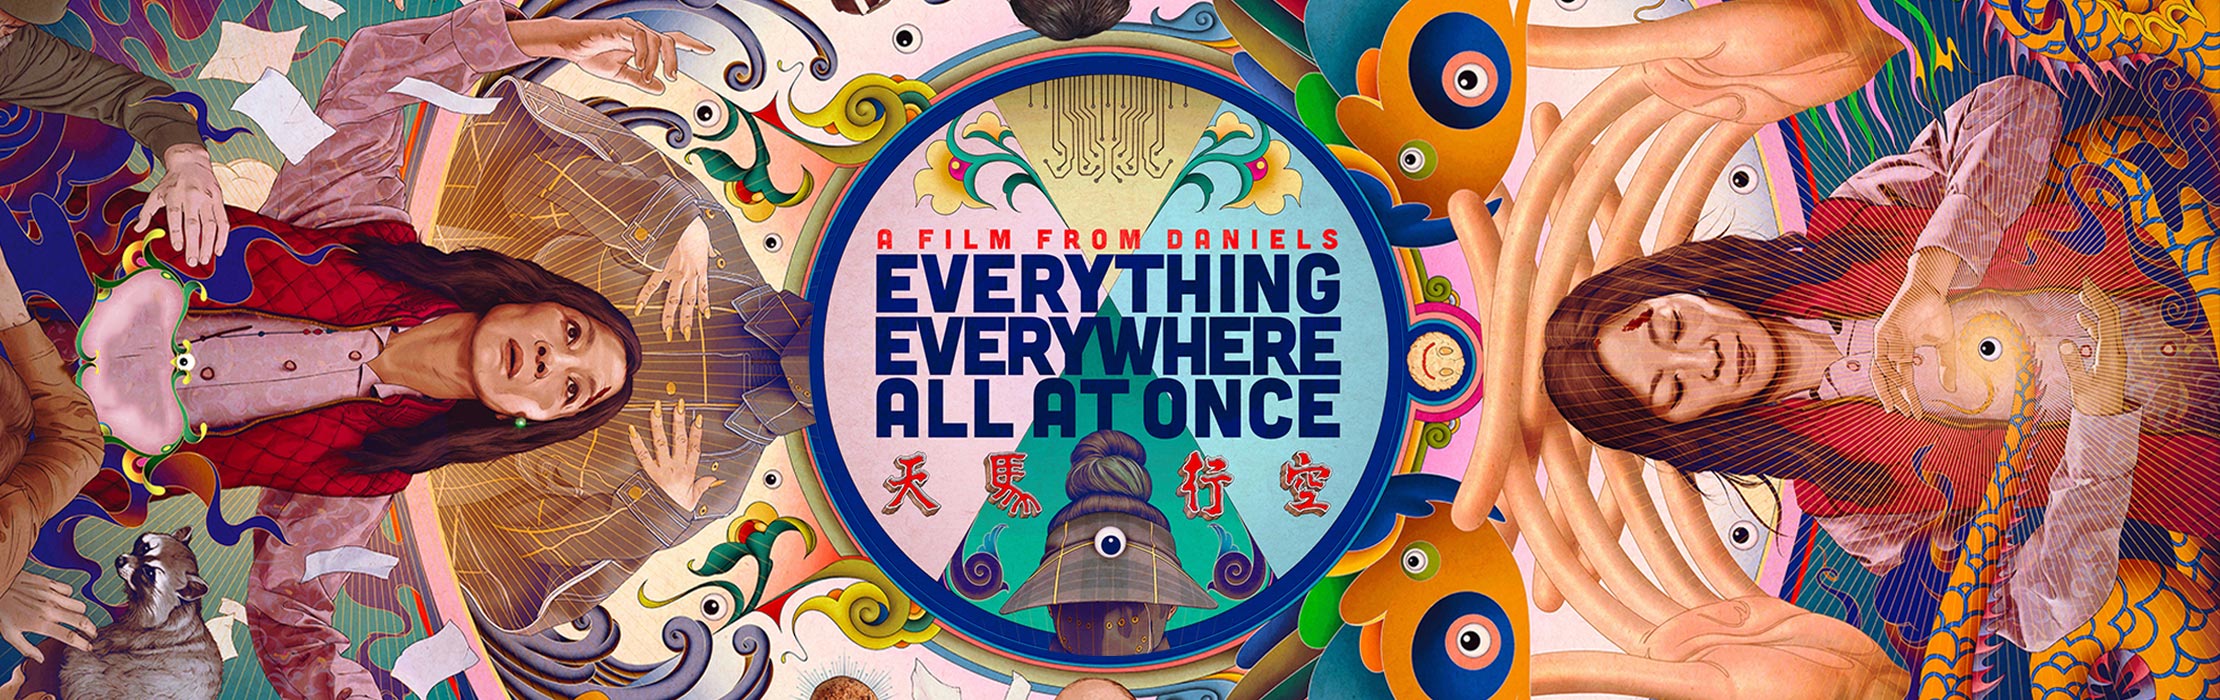 Everything Everywhere All at Once. Film Info and Screening Times. The Cinema in The Arches